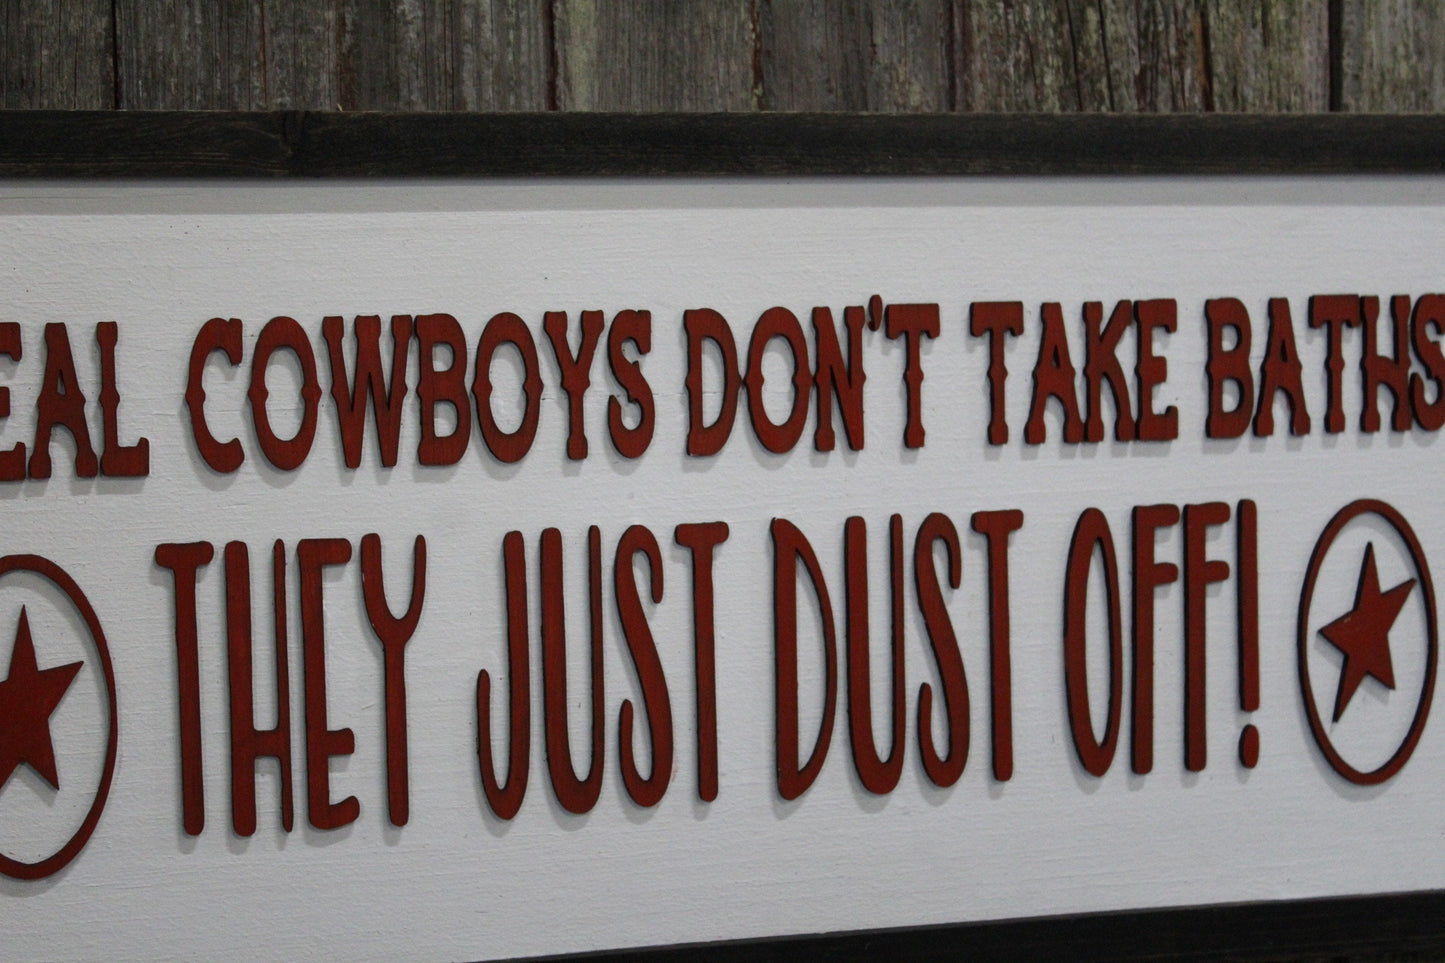 Real Cowboys Wood Sign 3D Raised Text Don't Take Baths Dust Off Horses Barn Life Funny Sign Farmhouse Rustic Primitive Framed Barn Sign